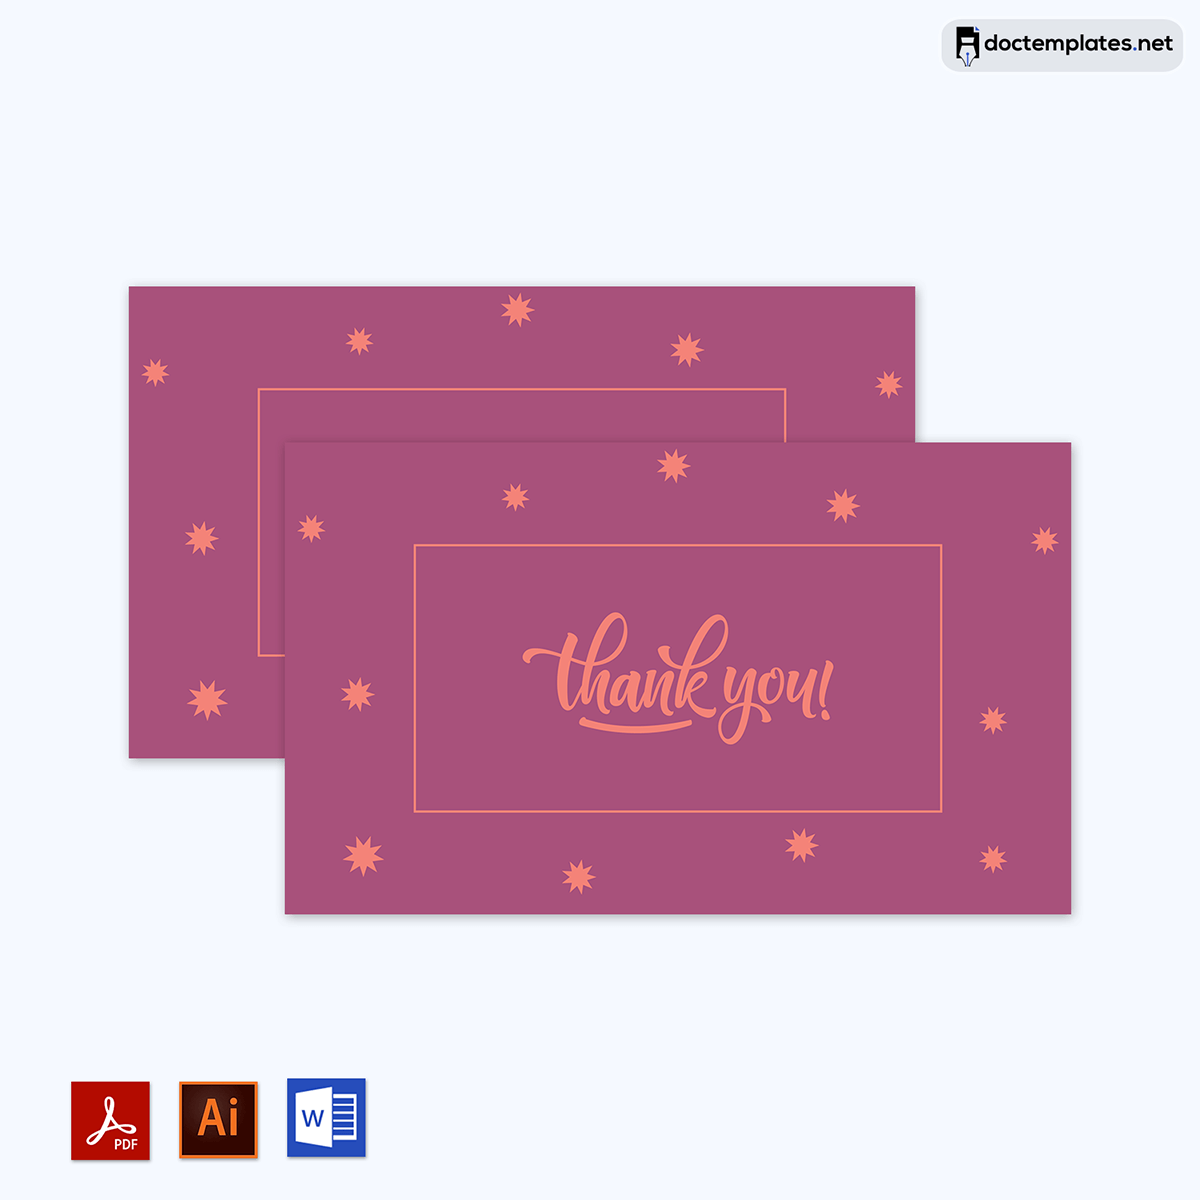 Image of Thank you cards (free)
Thank you cards (free)
01